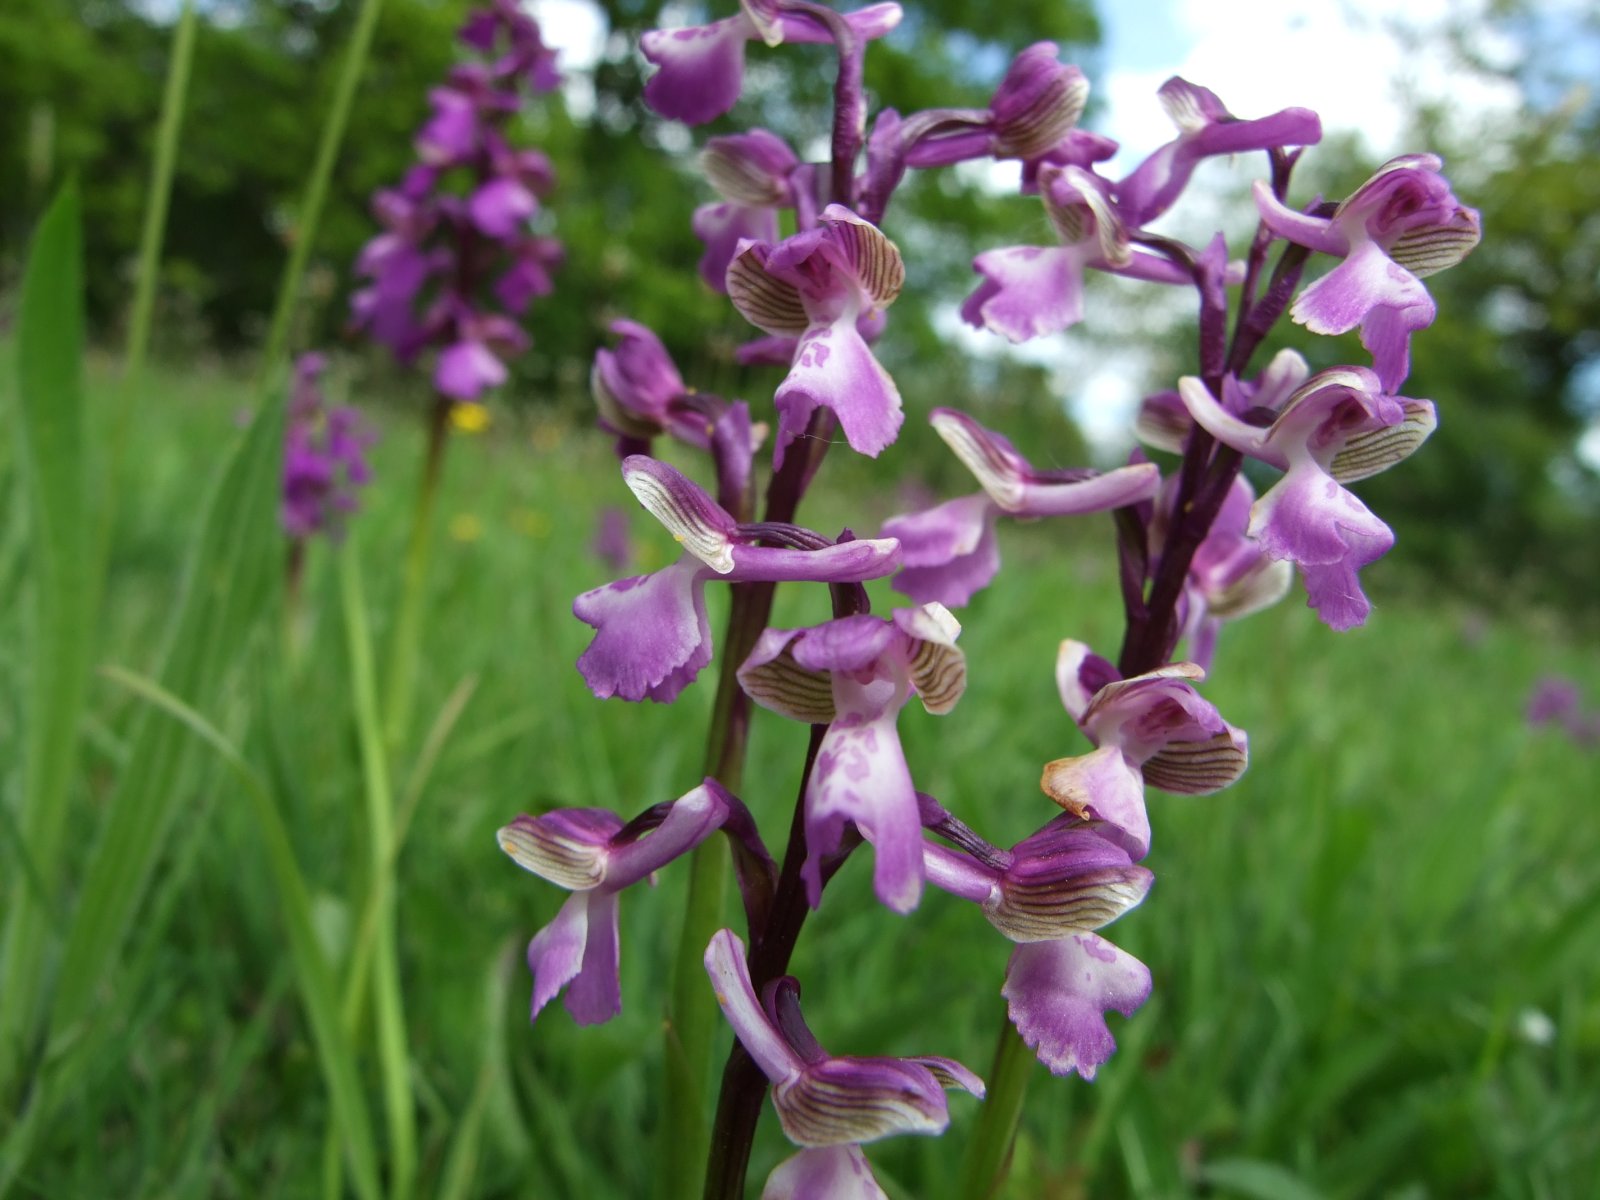 Photographs of wild orchids in Kent, England